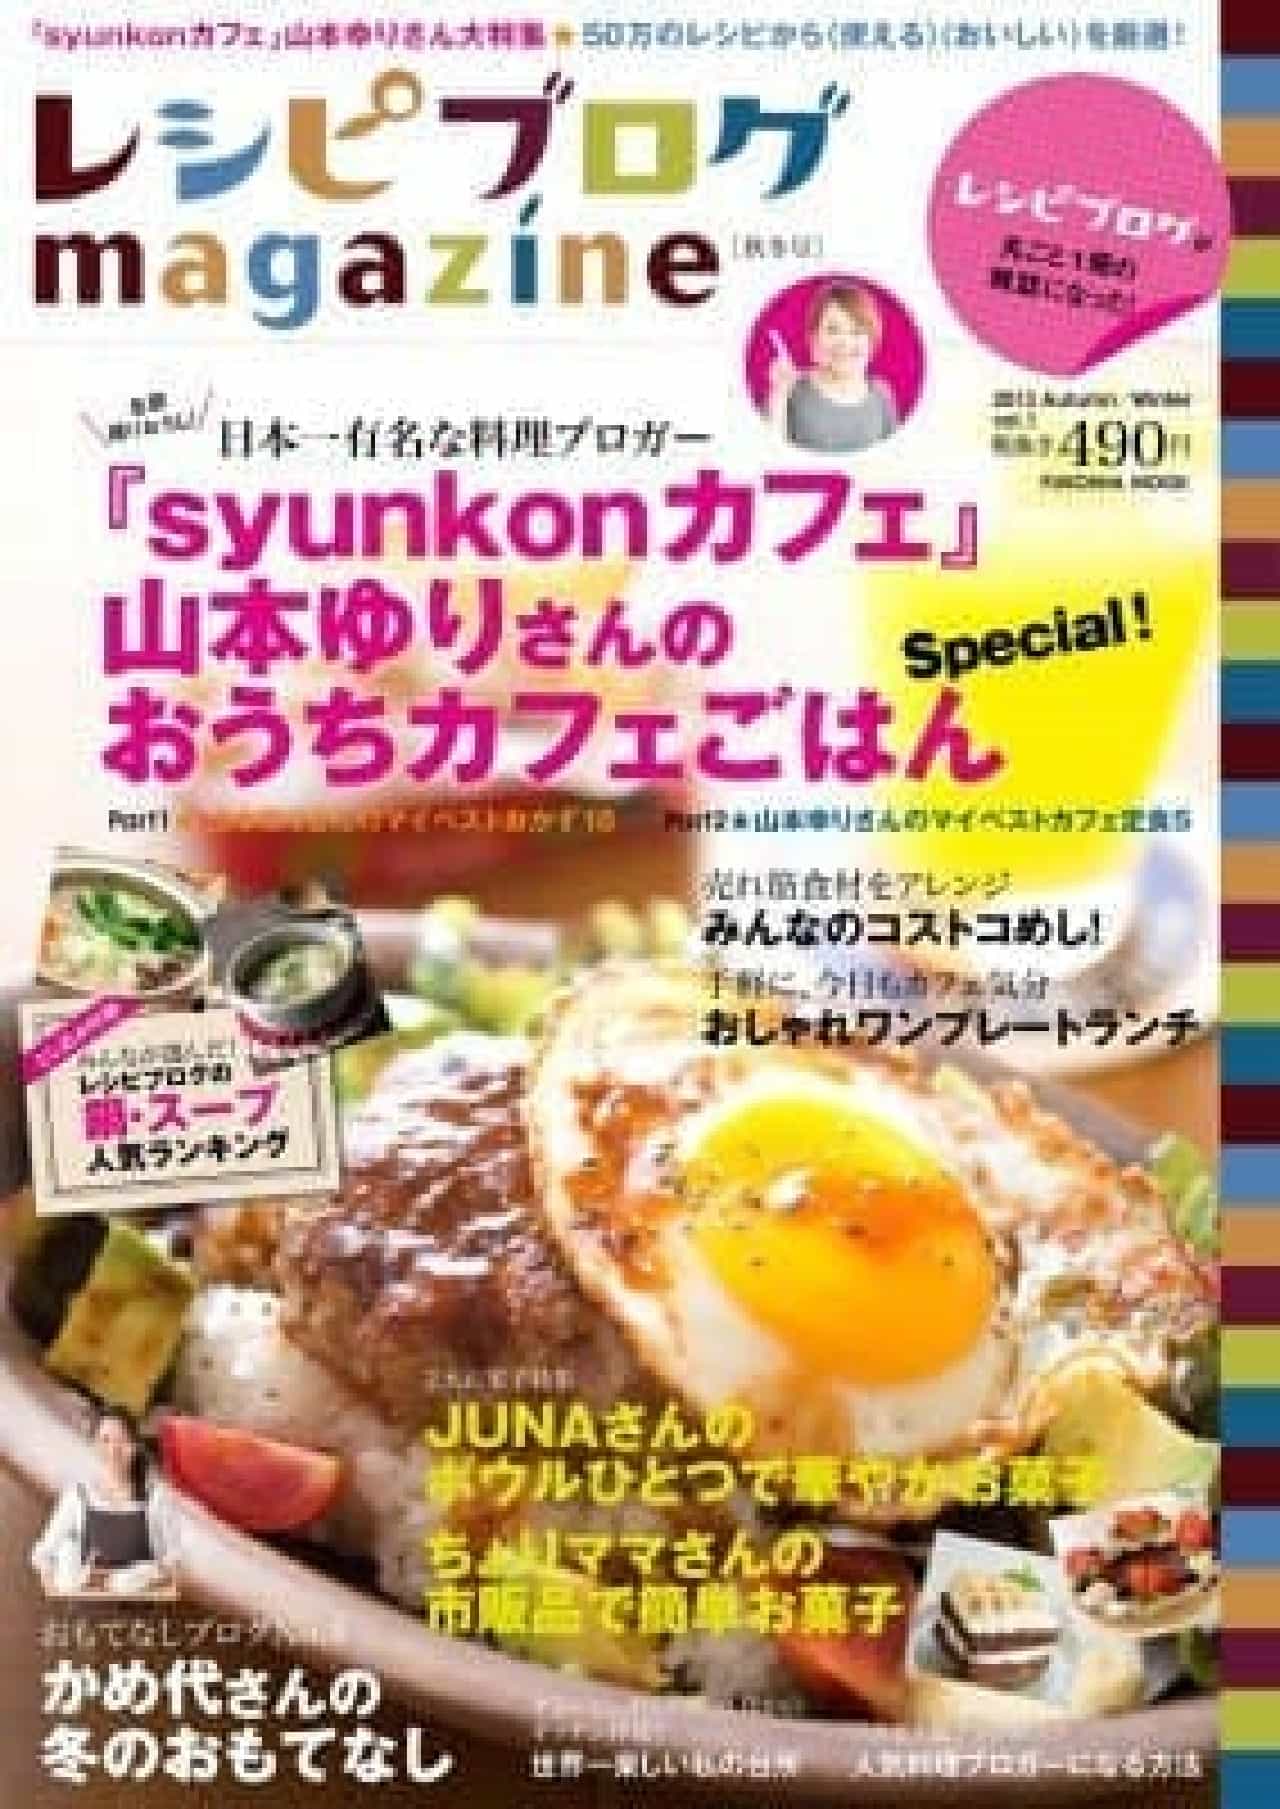 First issue of Mook book of "Recipe Blog"